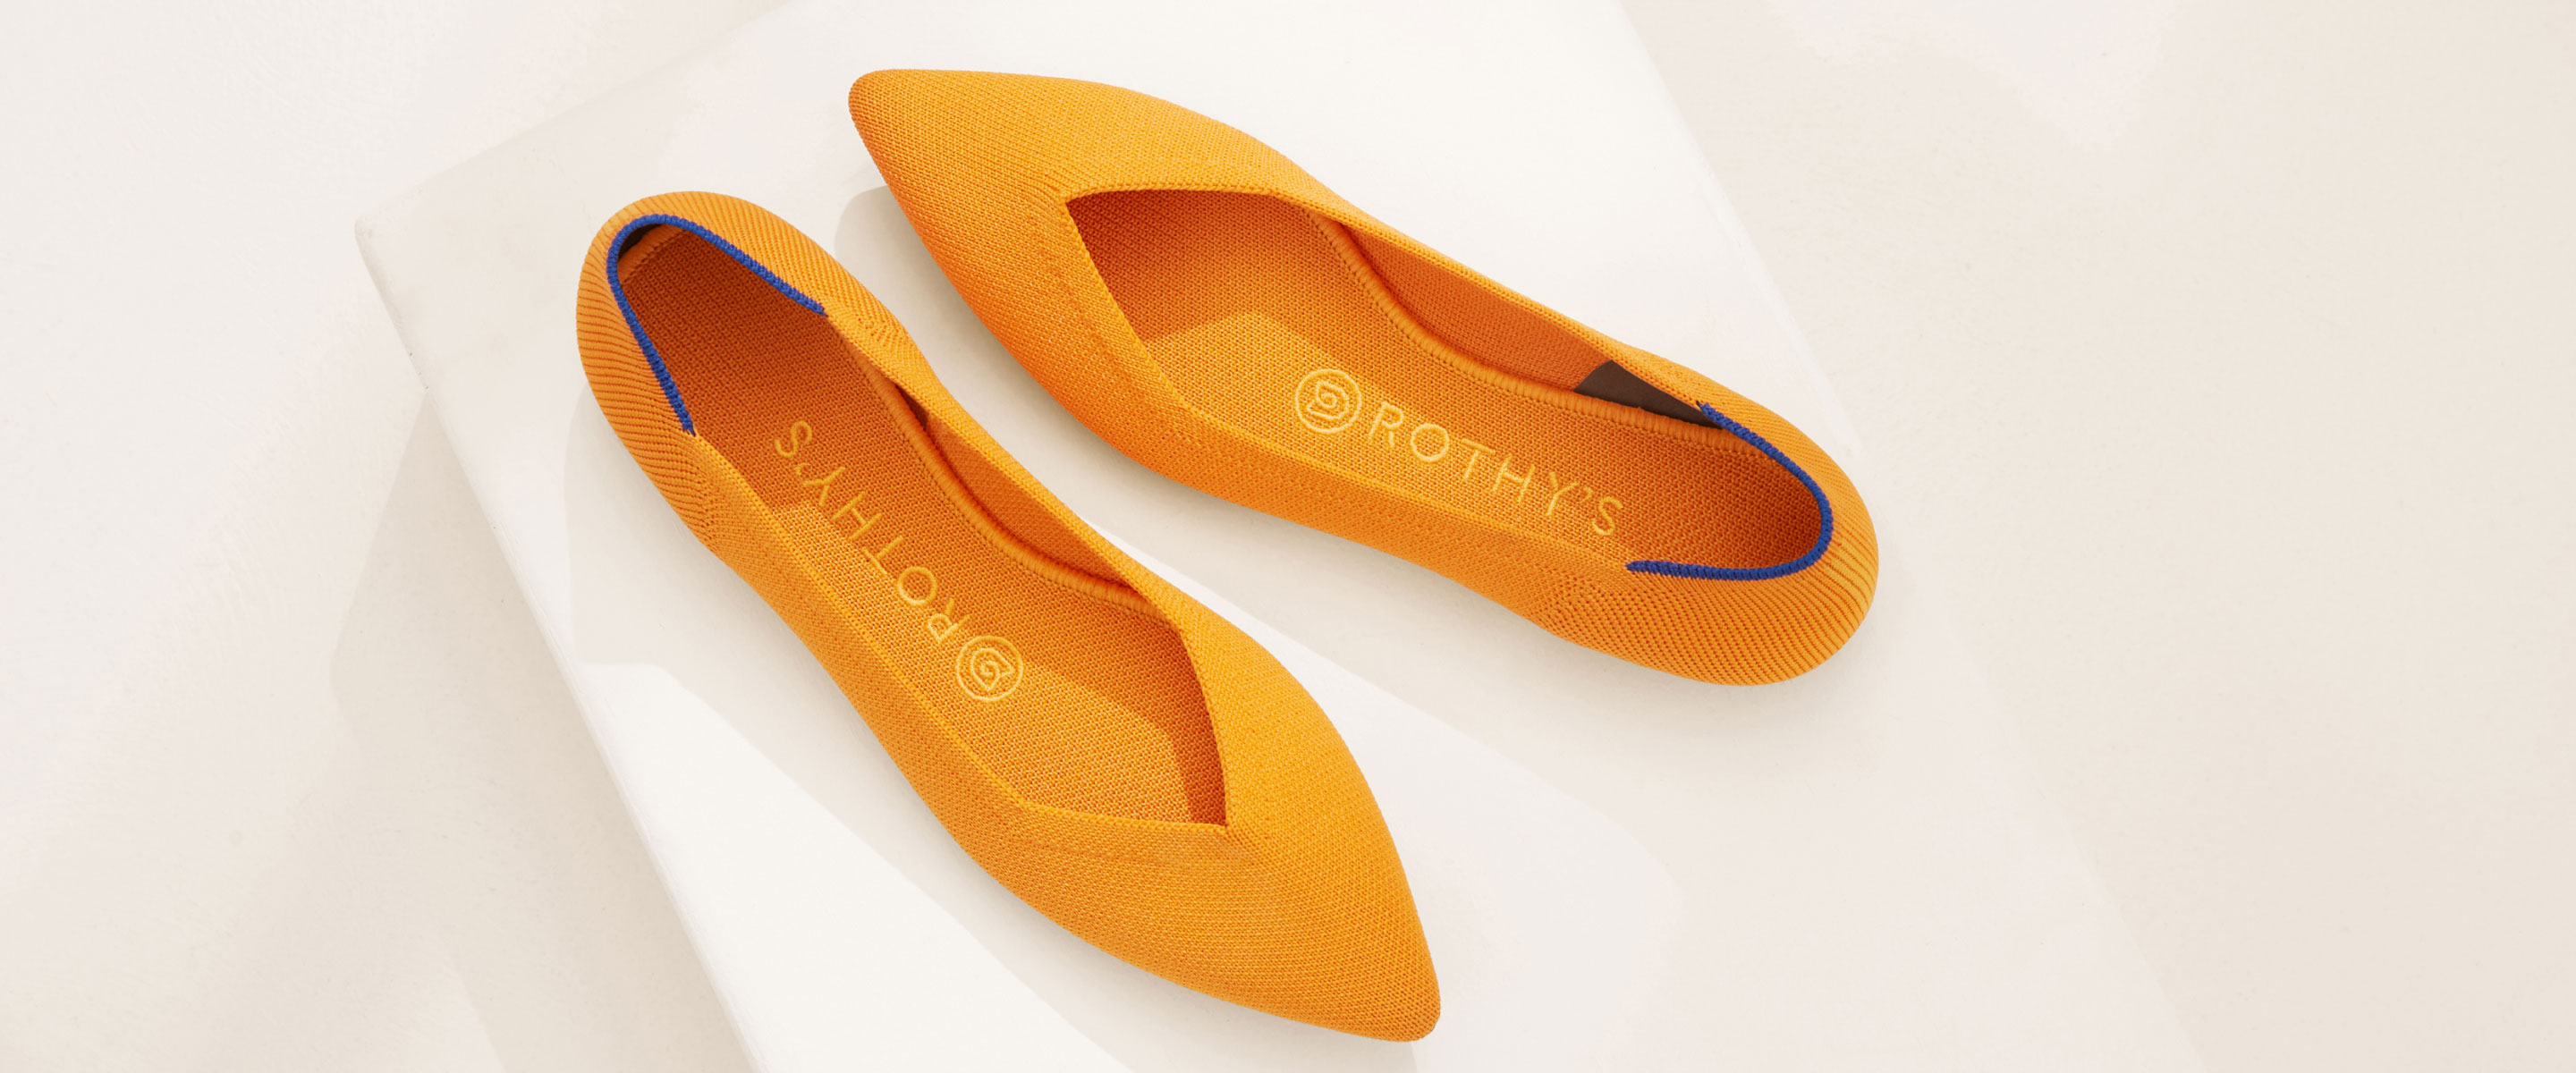 Rothy’s ethical ballet flat made from recycled plastic bottles